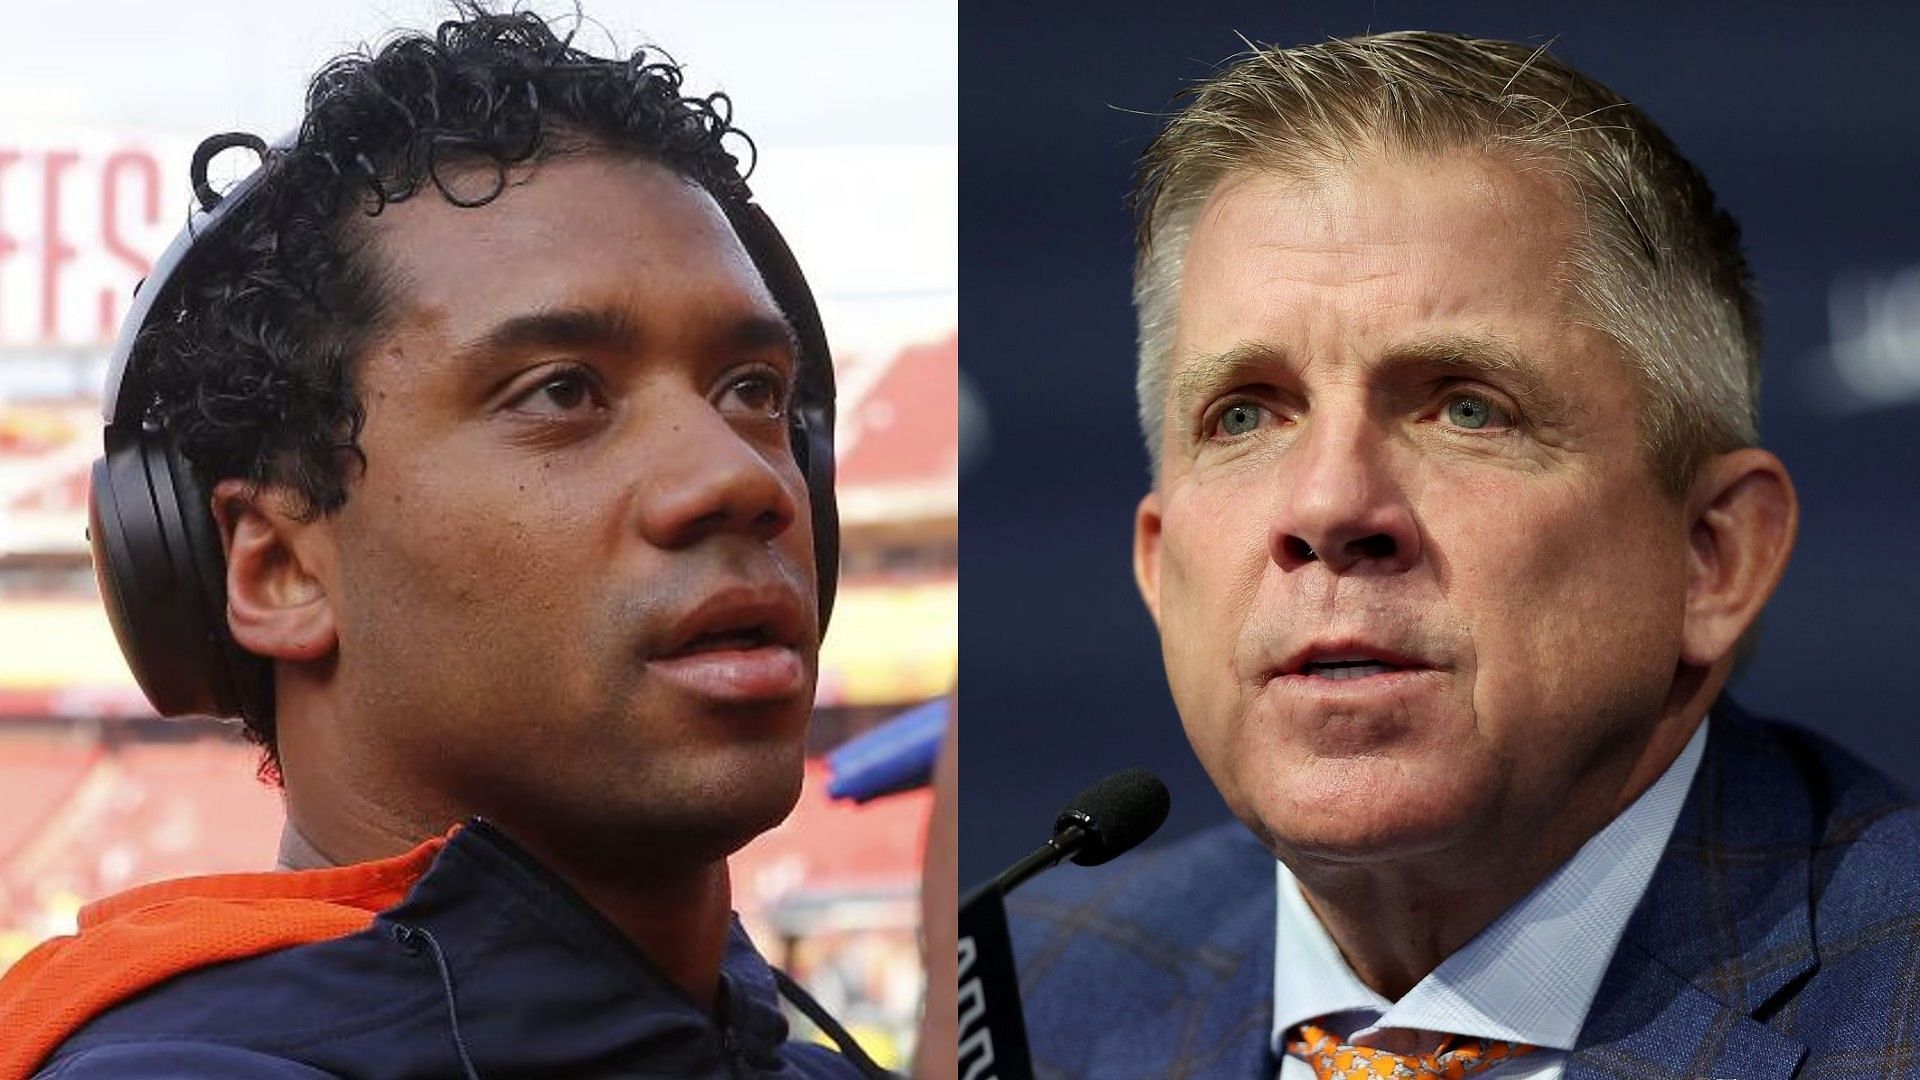 Russell Wilson and Sean Payton heading for tough times, claims Rob Ninkovich